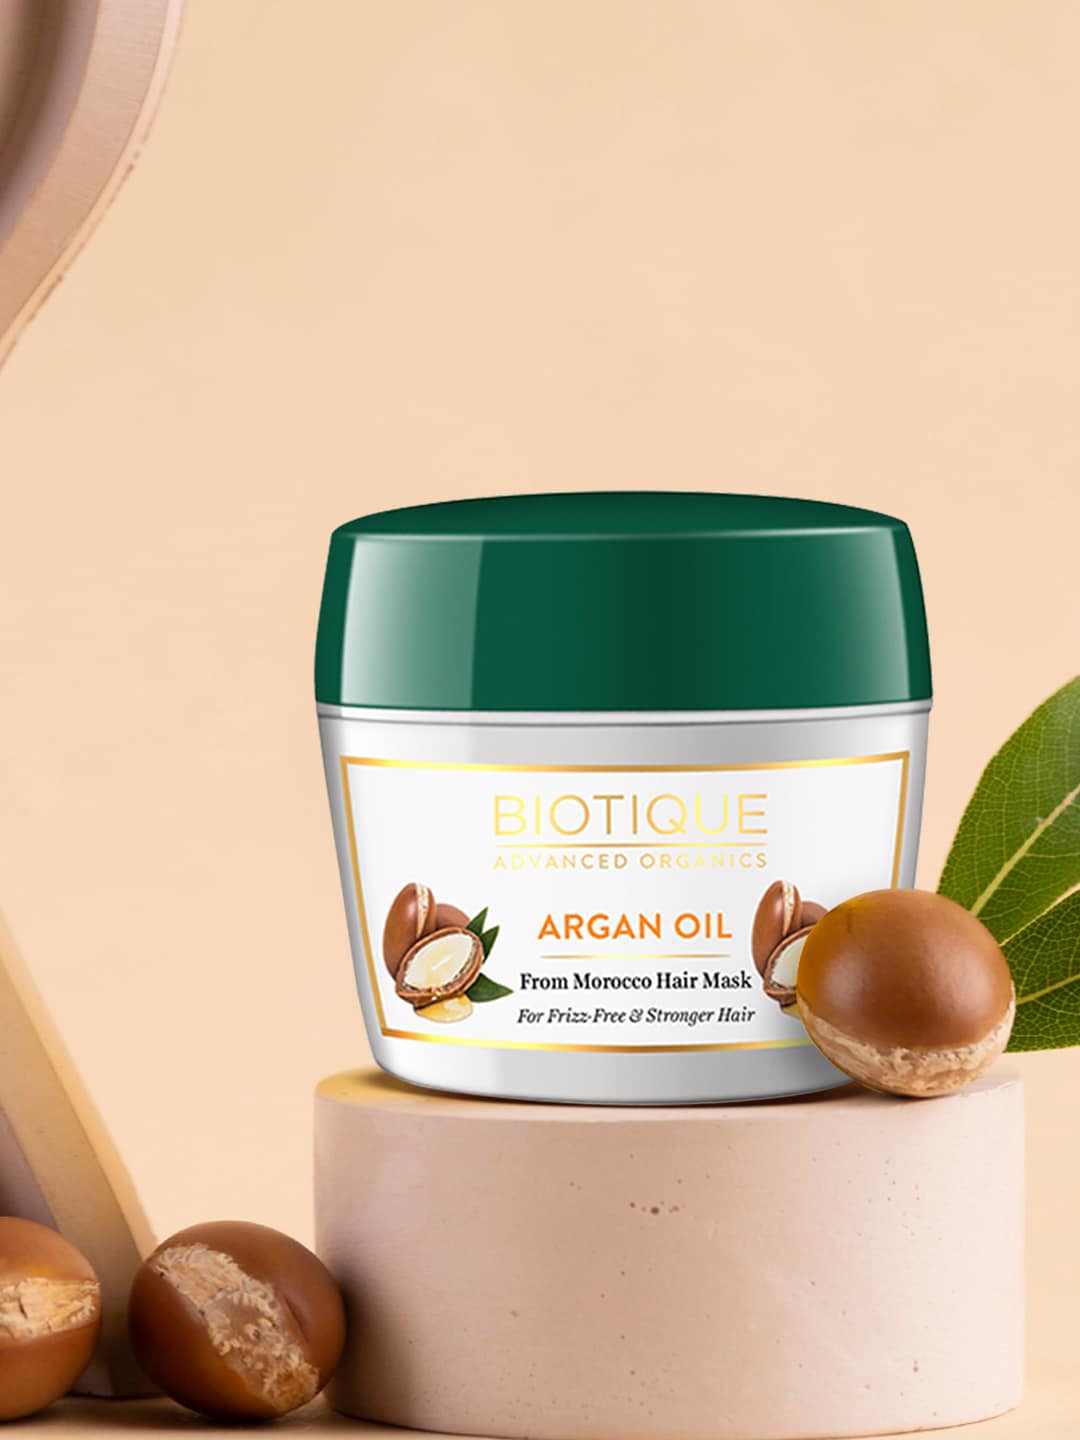 Biotique Unisex Advanced Organics Argan Oil From Morocco Hair Mask 175 g Price in India